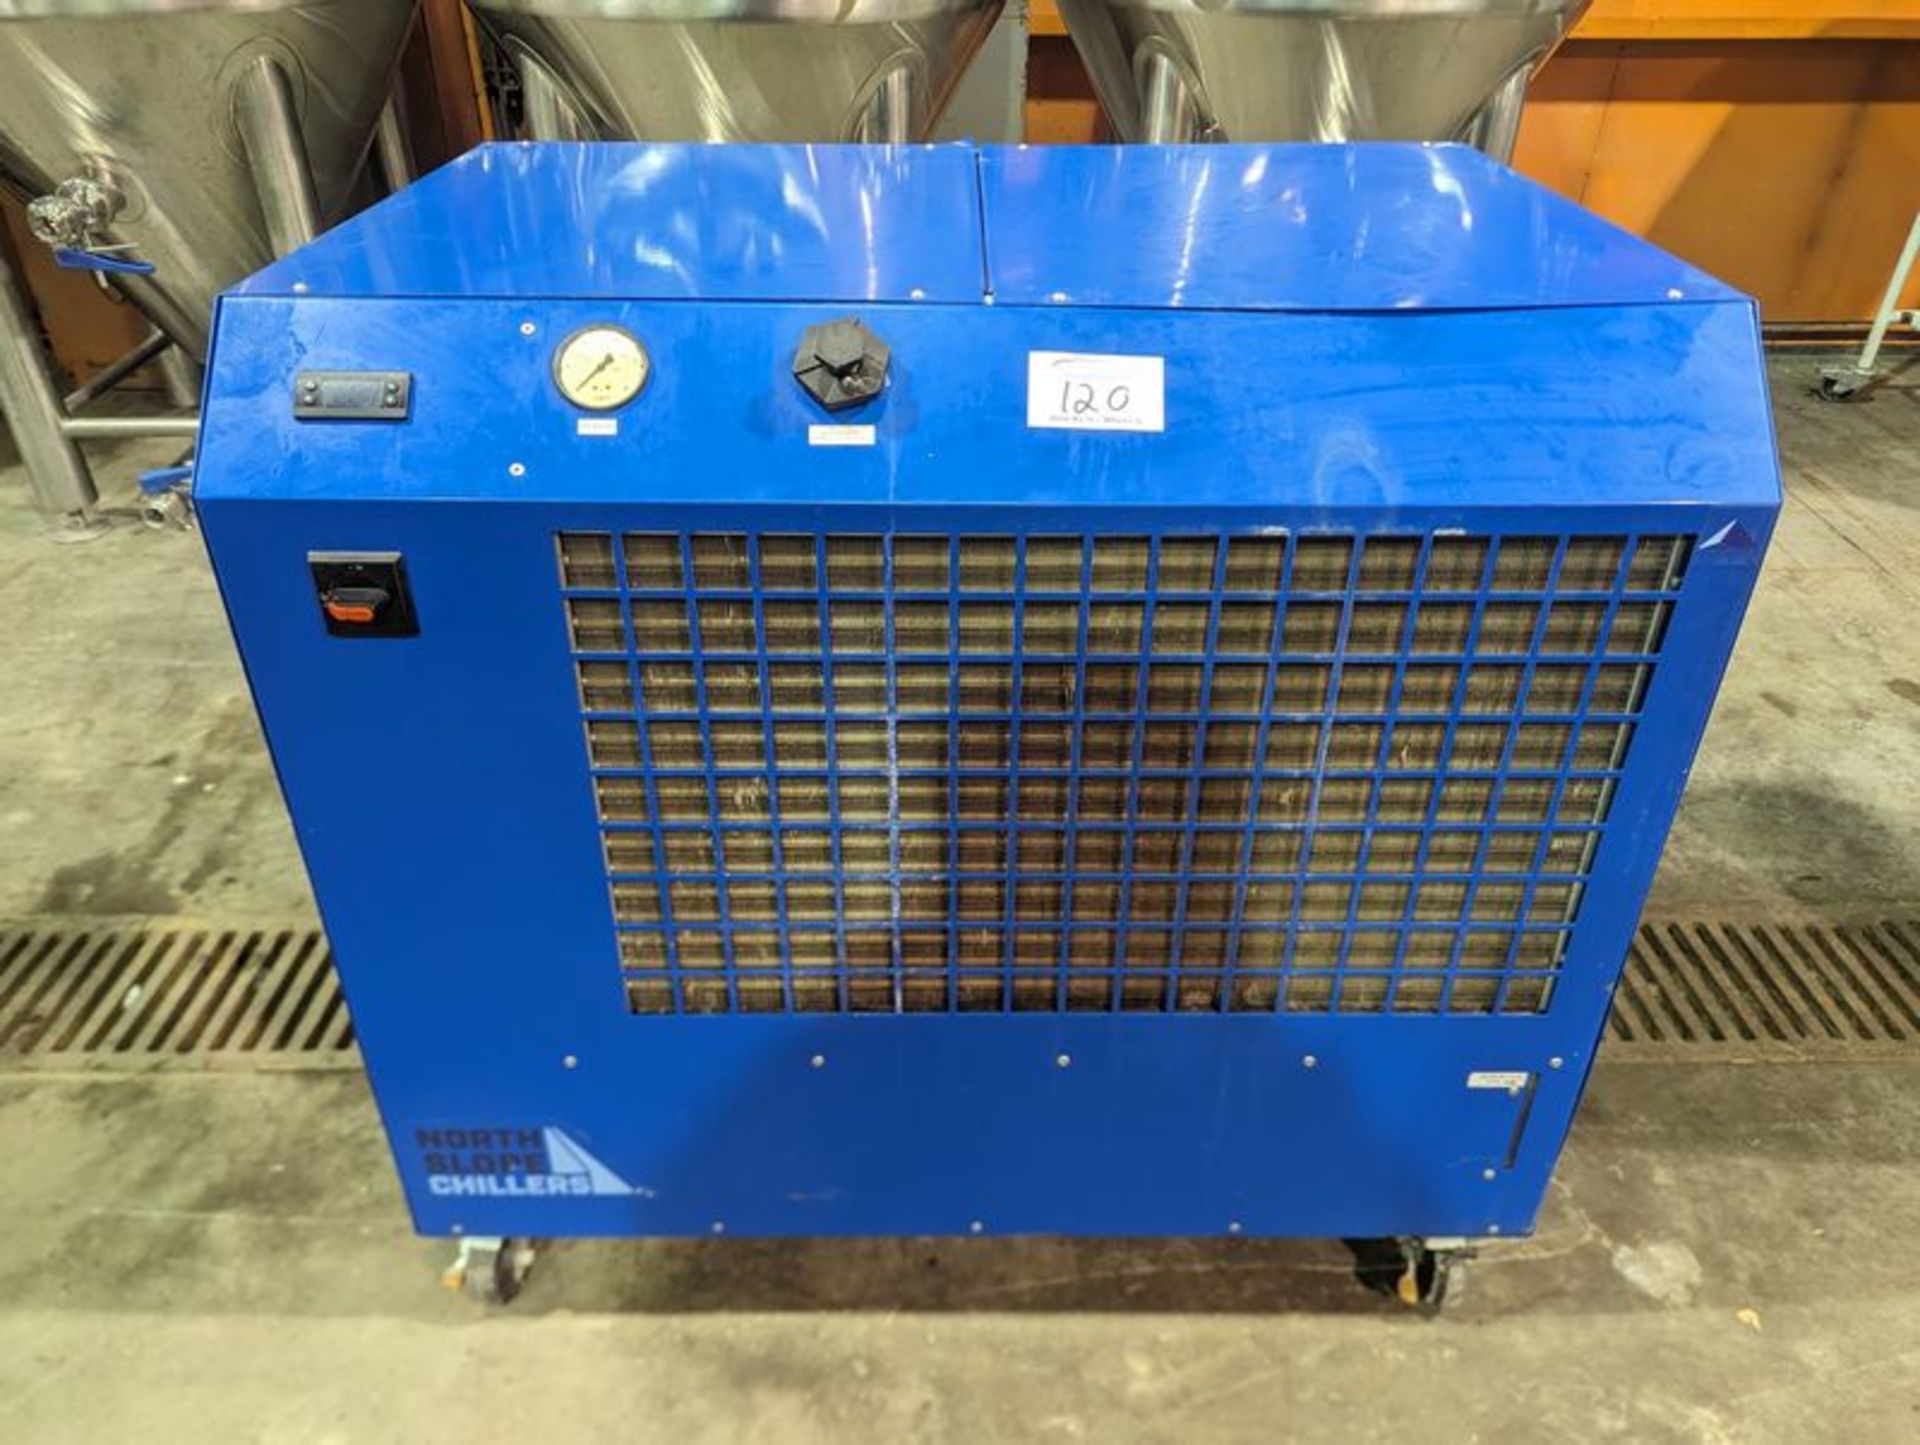 North Slope Model NSC2000-230/1 Glycol Chiller. Installed New in 2022